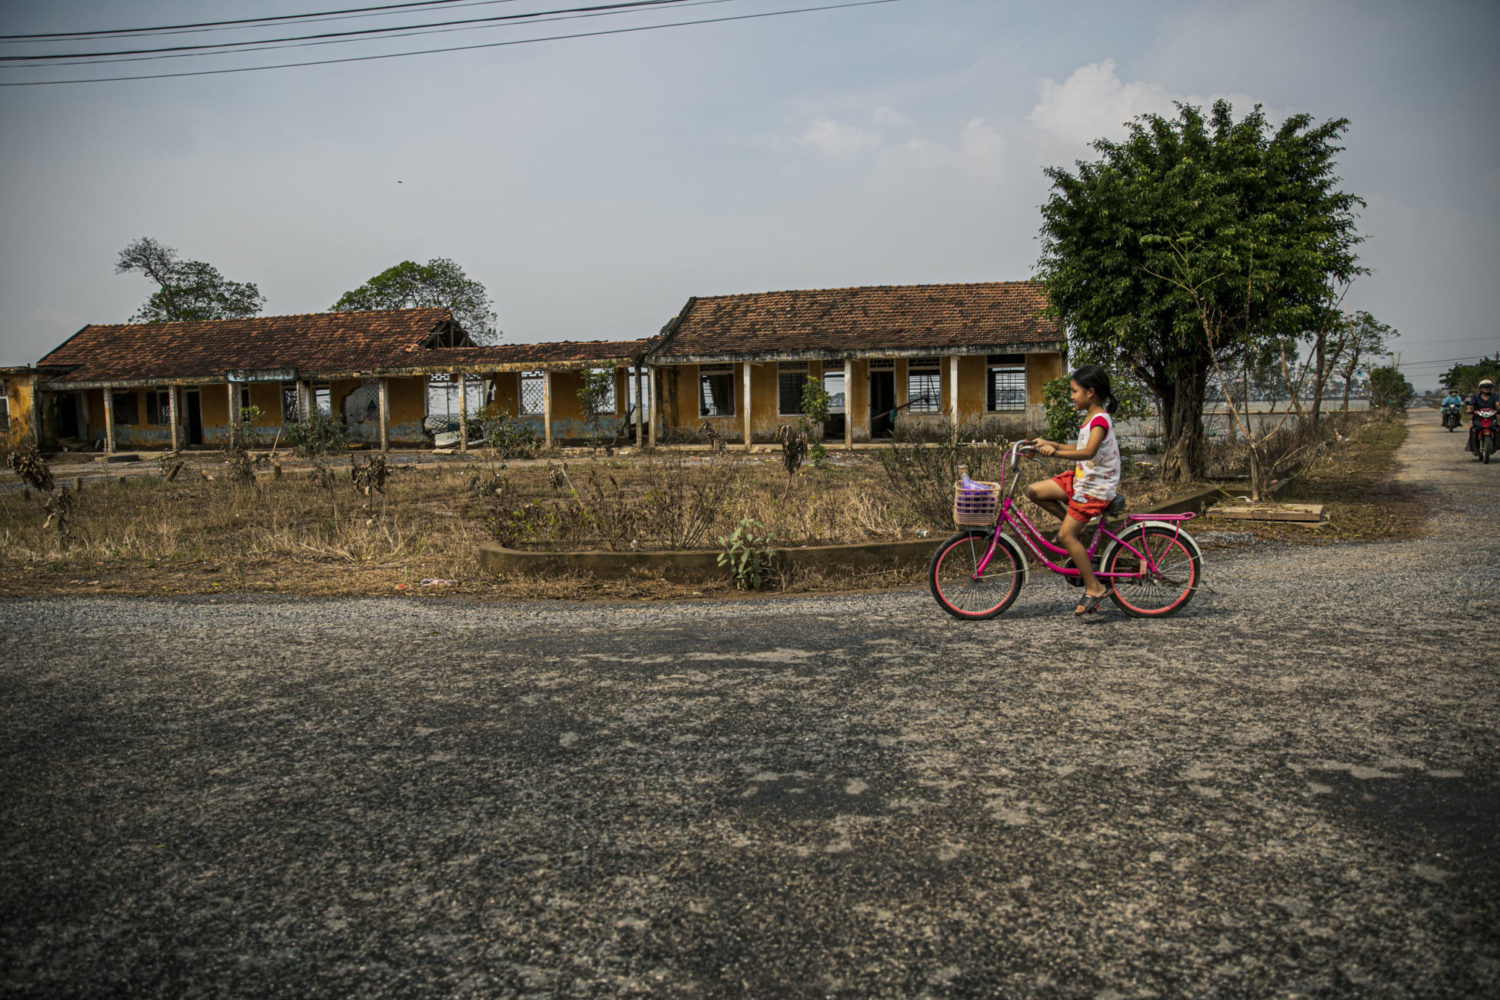 A girl cycles past buildings damaged by strong typhoons and floods in Le Thuy, Quang Binh, central Viet Nam.